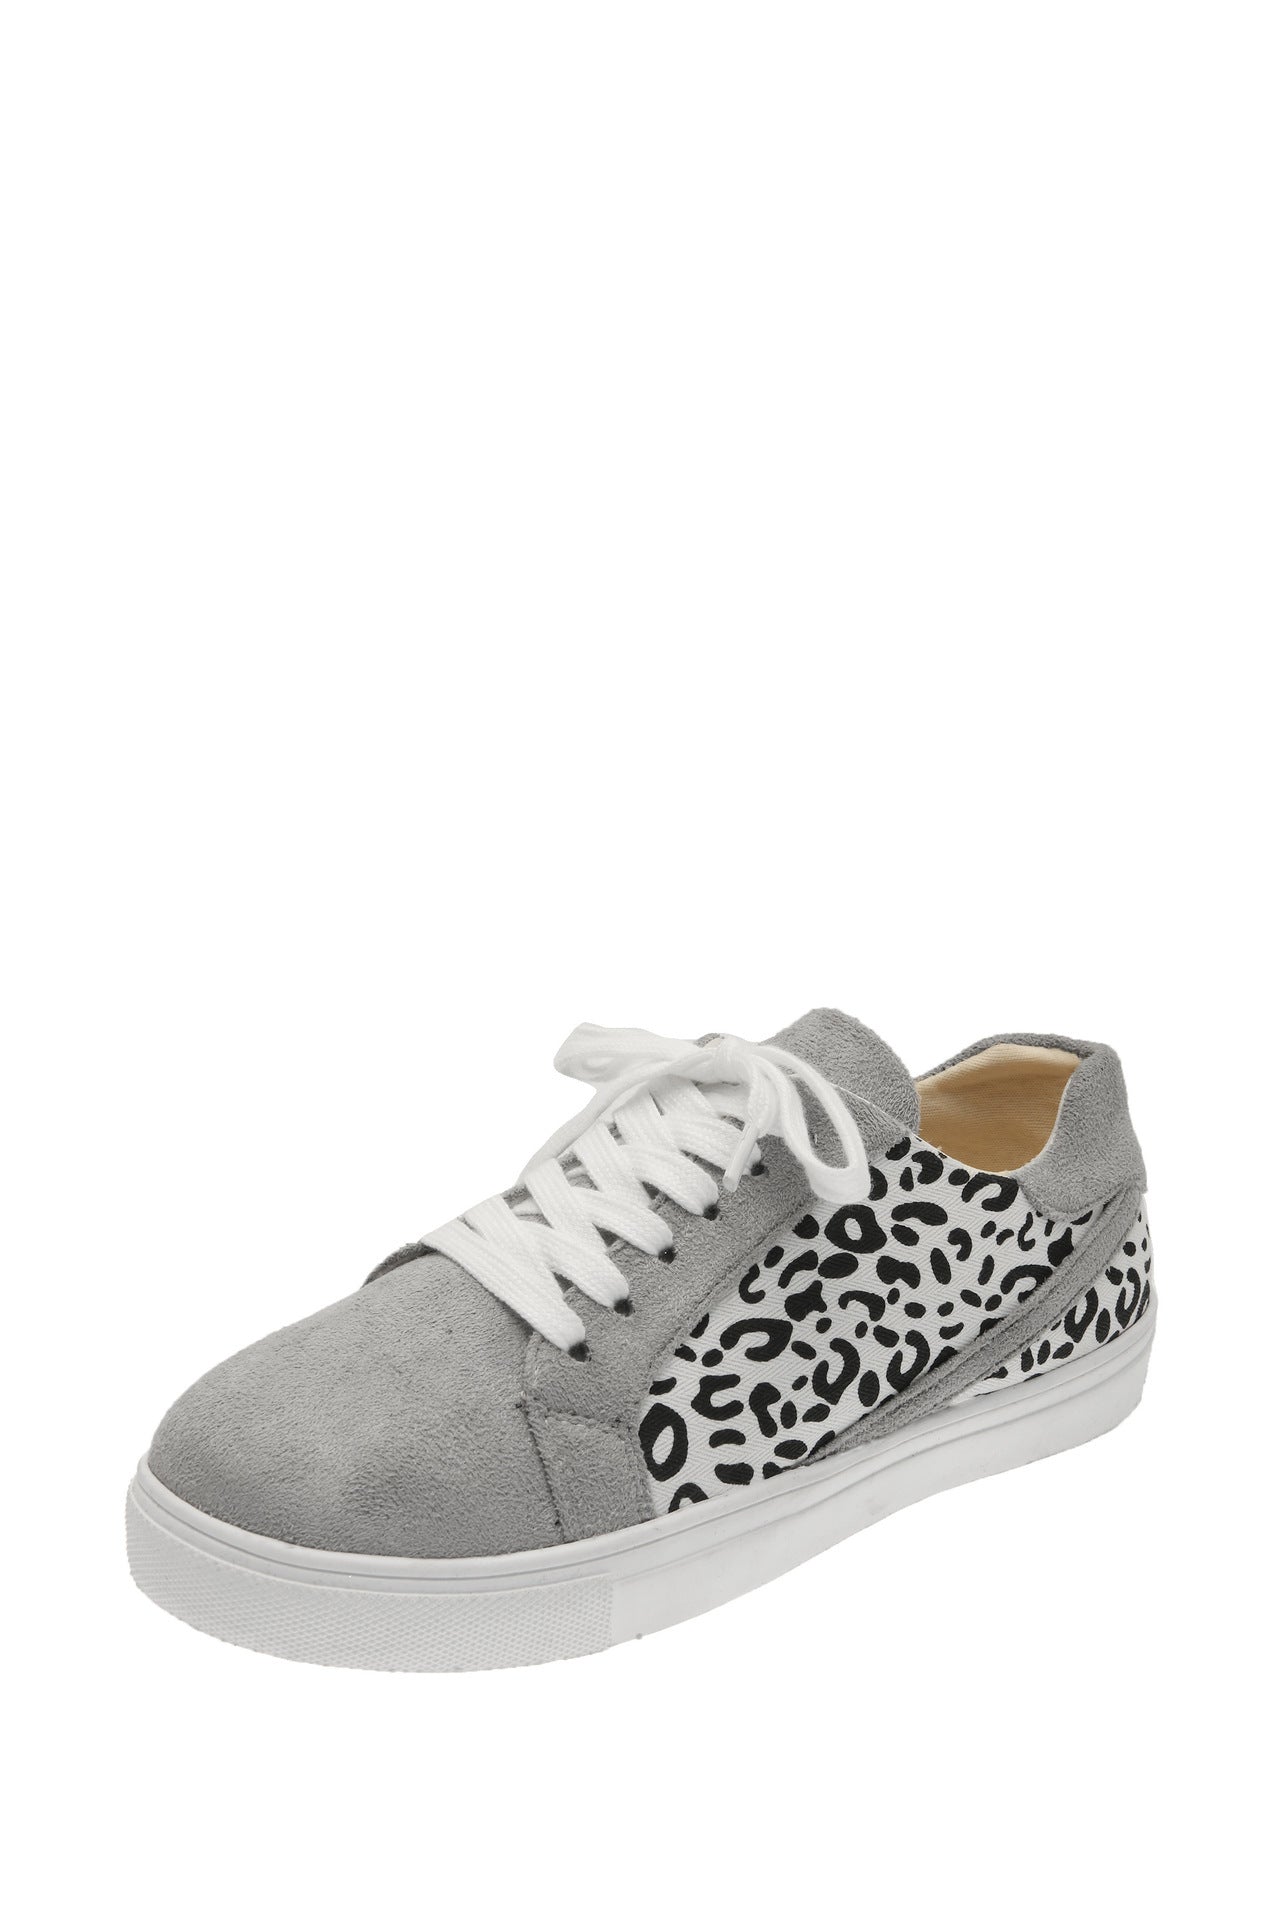 chaussures pour femmes ,style "tigre"